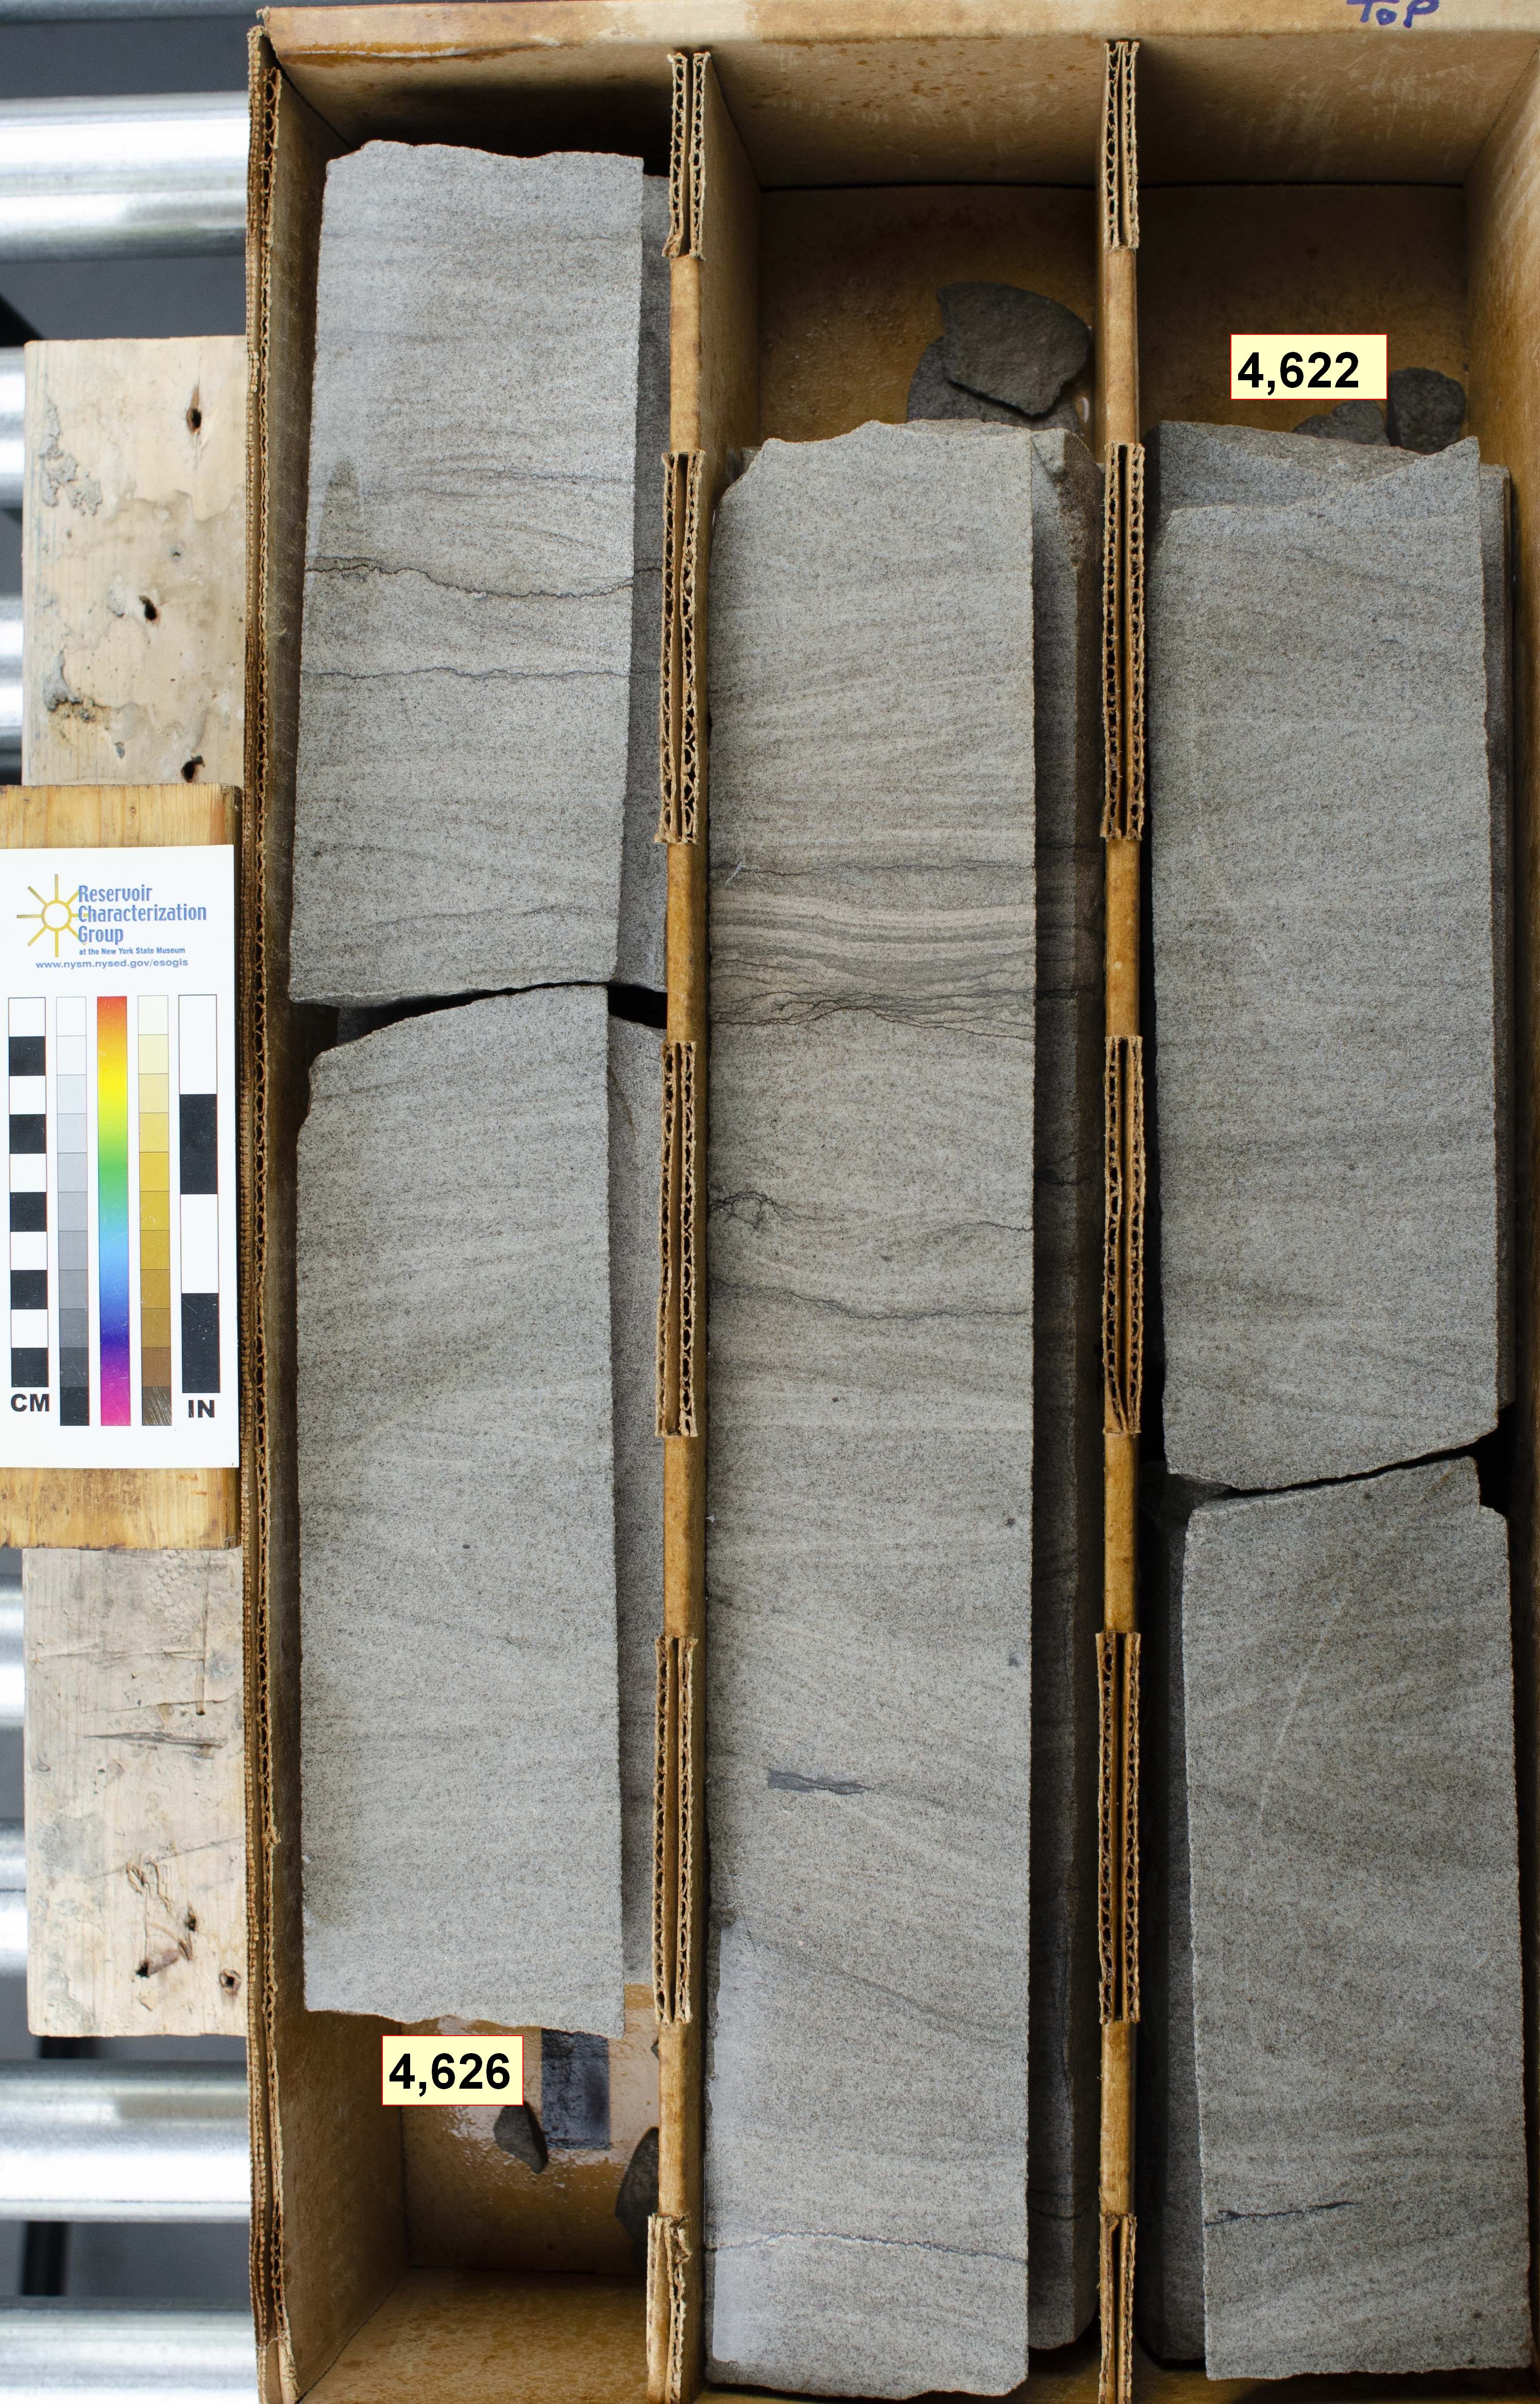 Core 2: Cambrian Rome Formation (cross-bedded and burrowed marine sandstones)